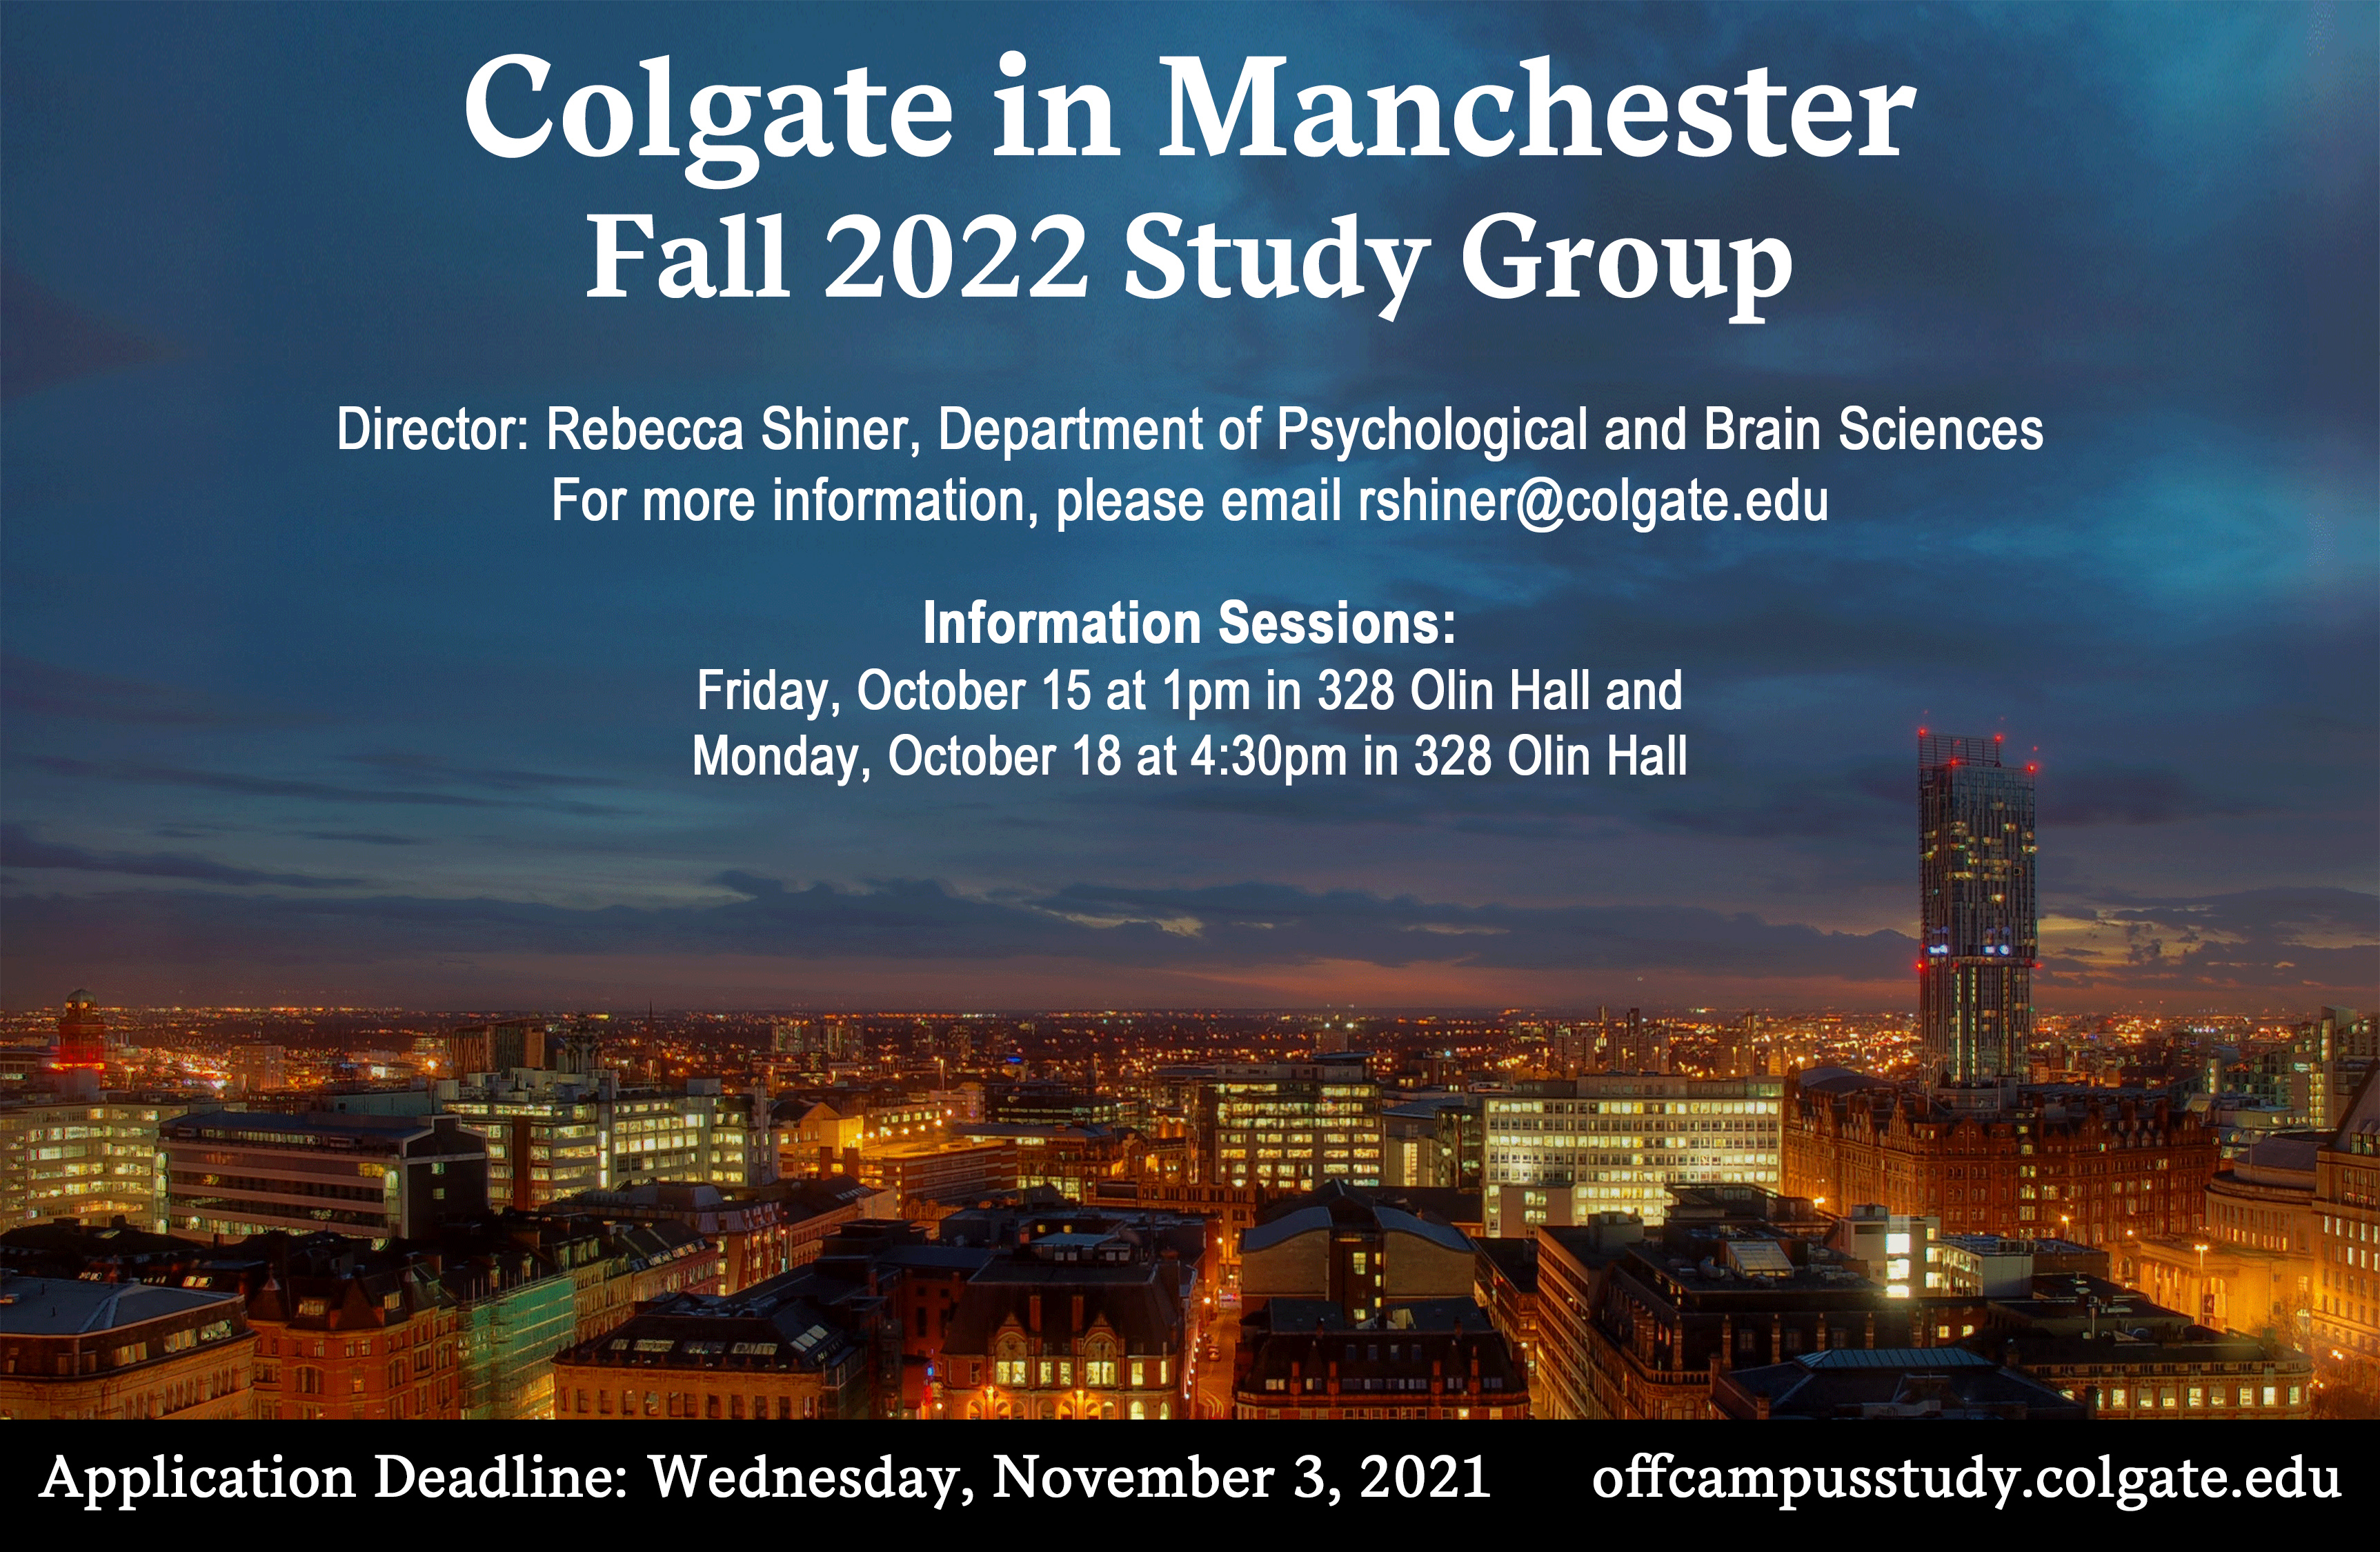 Fall 2022 Manchester Study Group Poster